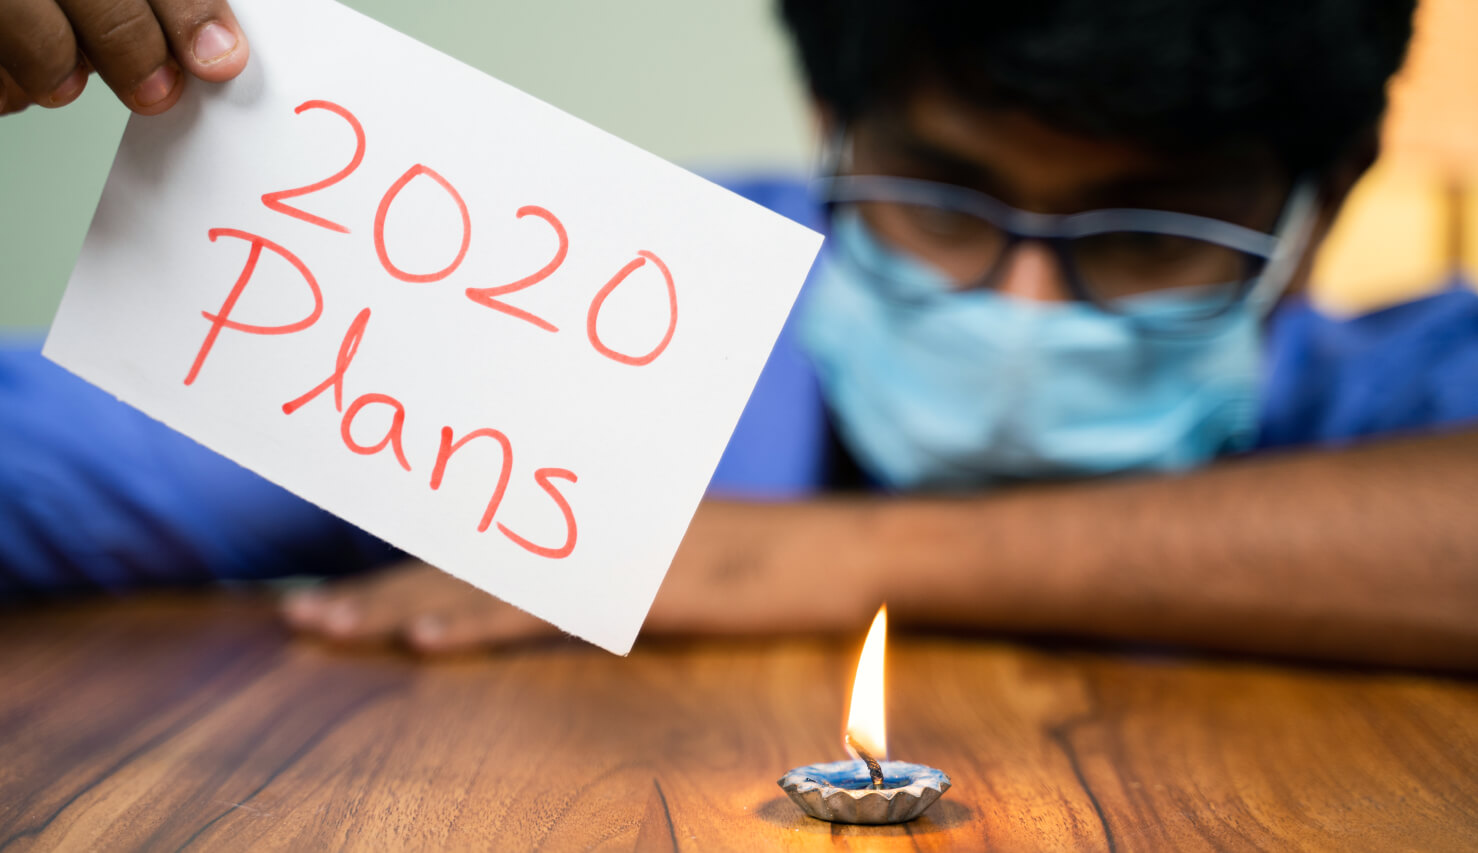 2020 Plans Up In Flames